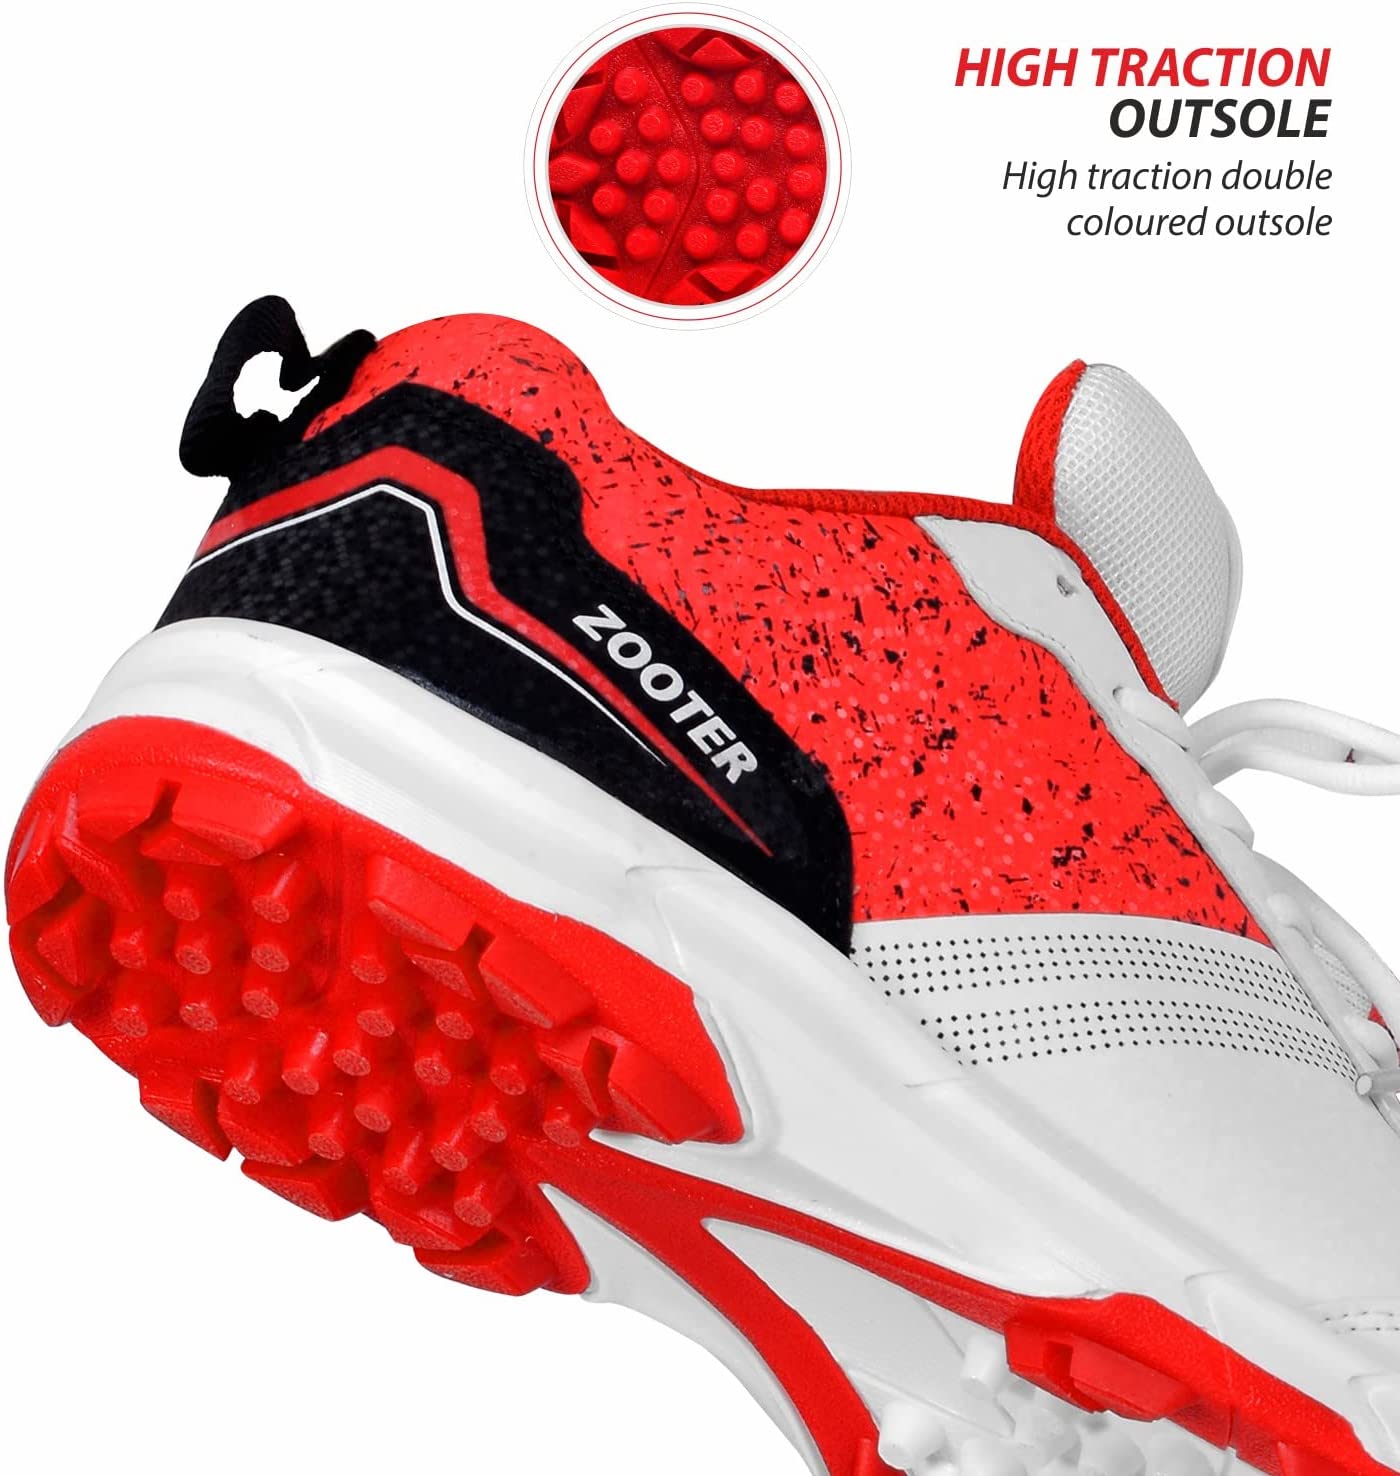 2023 DSC Zooter Cricket Shoes (White-Red)